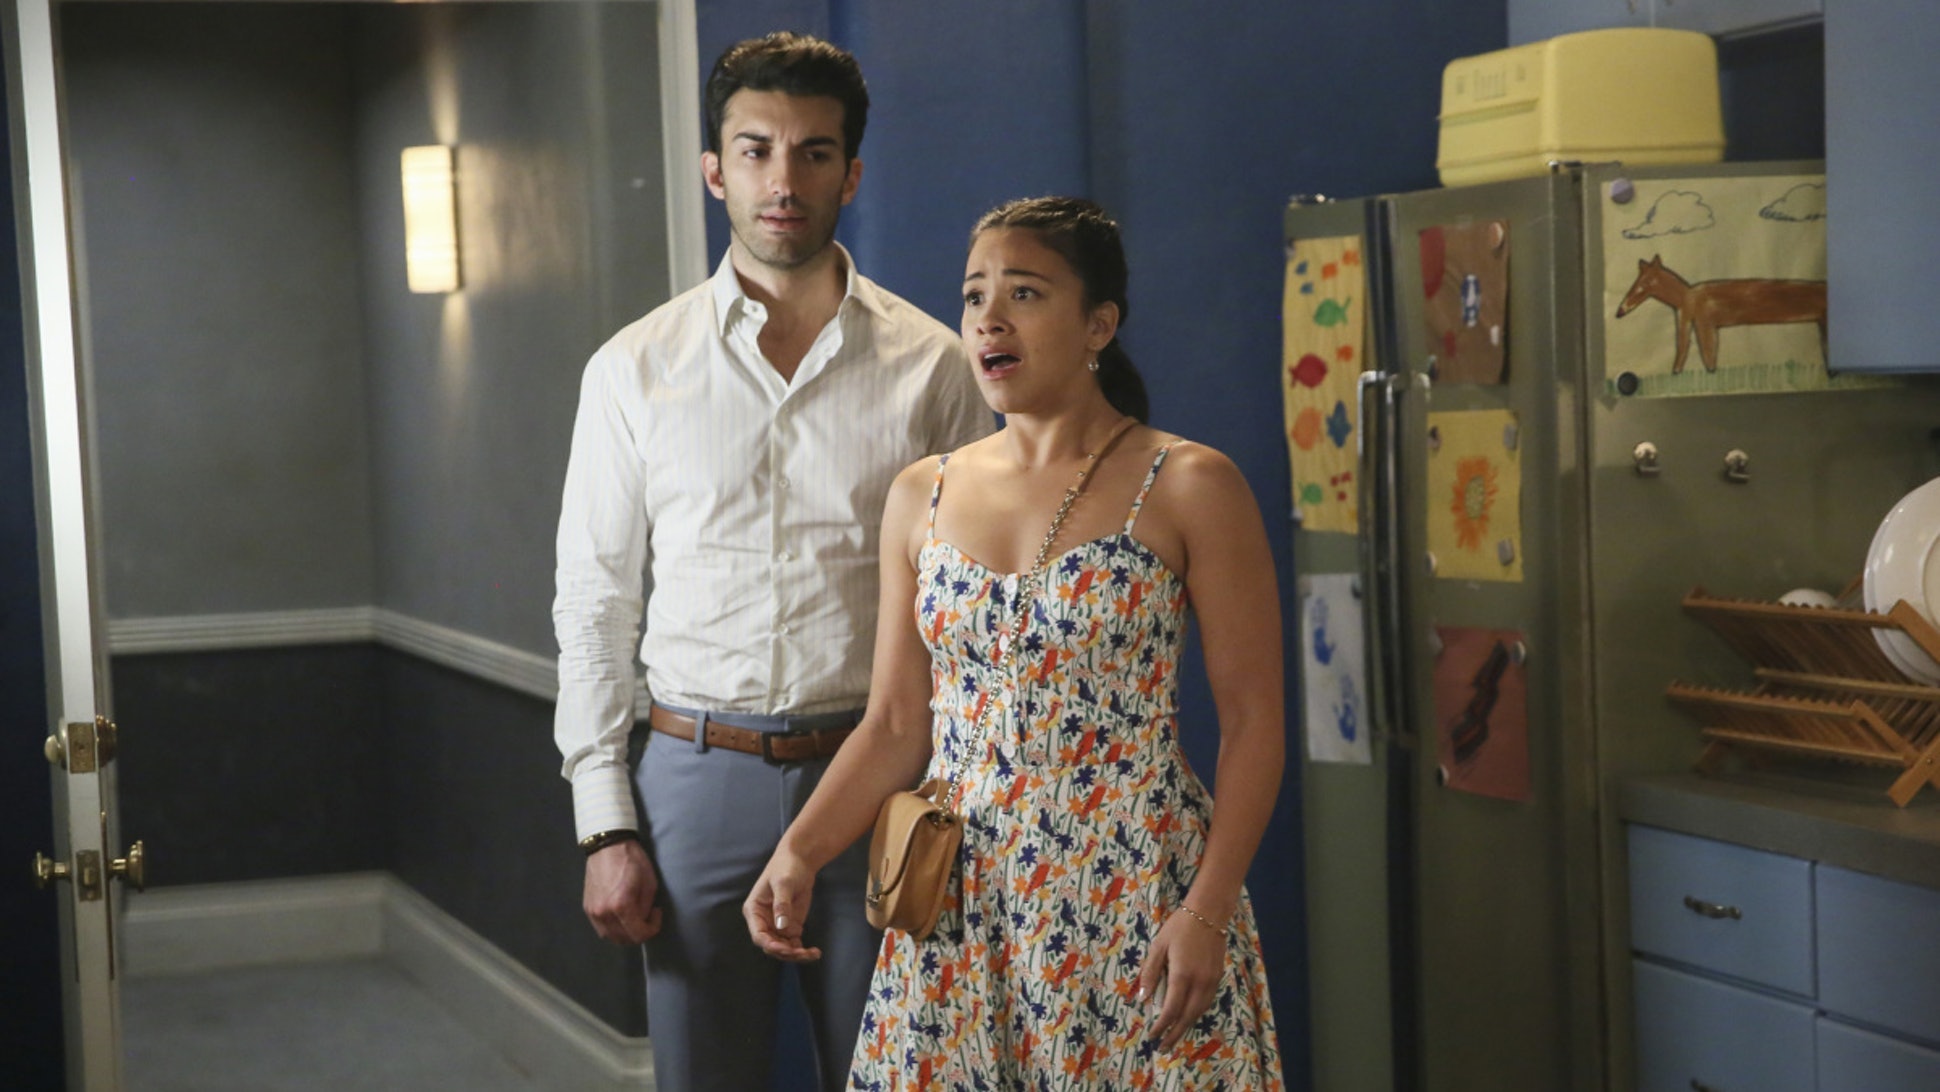 The Emotional, Impossible Season 5 Premiere of “Jane the Virgin”